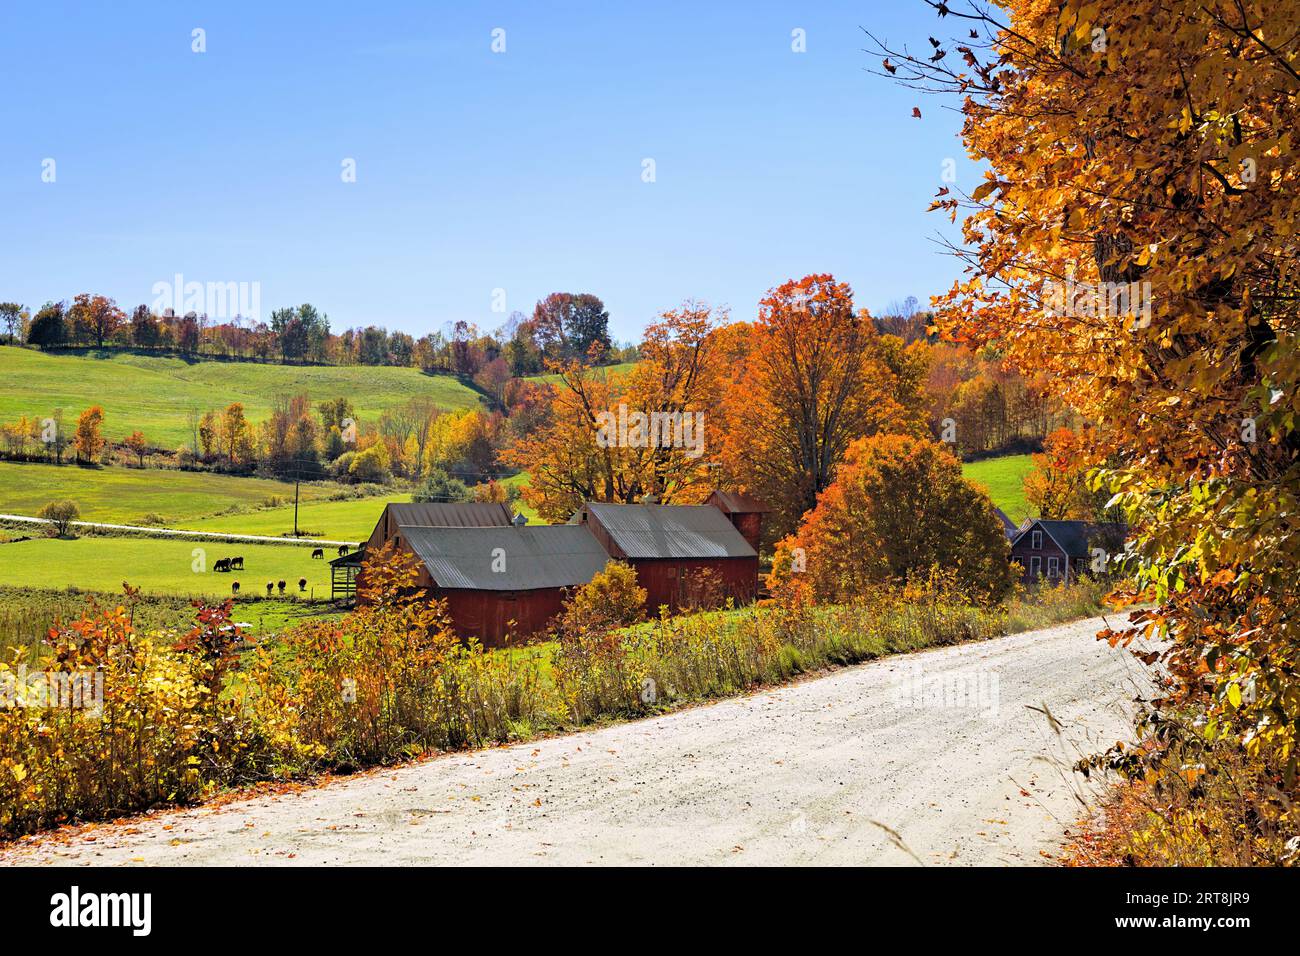 Autumn countryside with rustic red wooden barns and colorful fall leaves near Woodstock, Vermont, USA Stock Photo